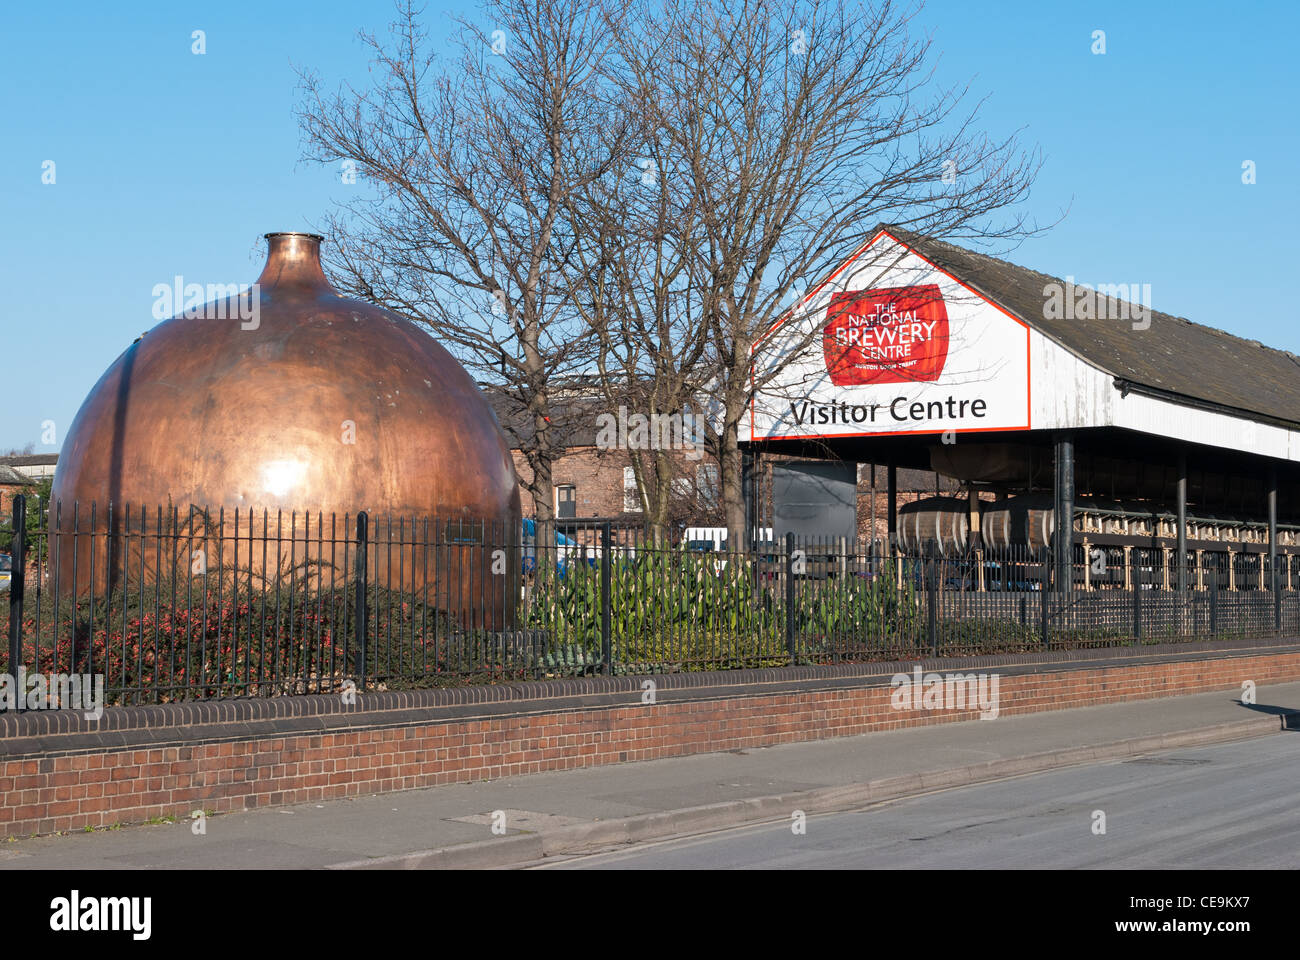 The National Brewery Centre visitor centre in Burton-on-Trent, Staffordshire Stock Photo